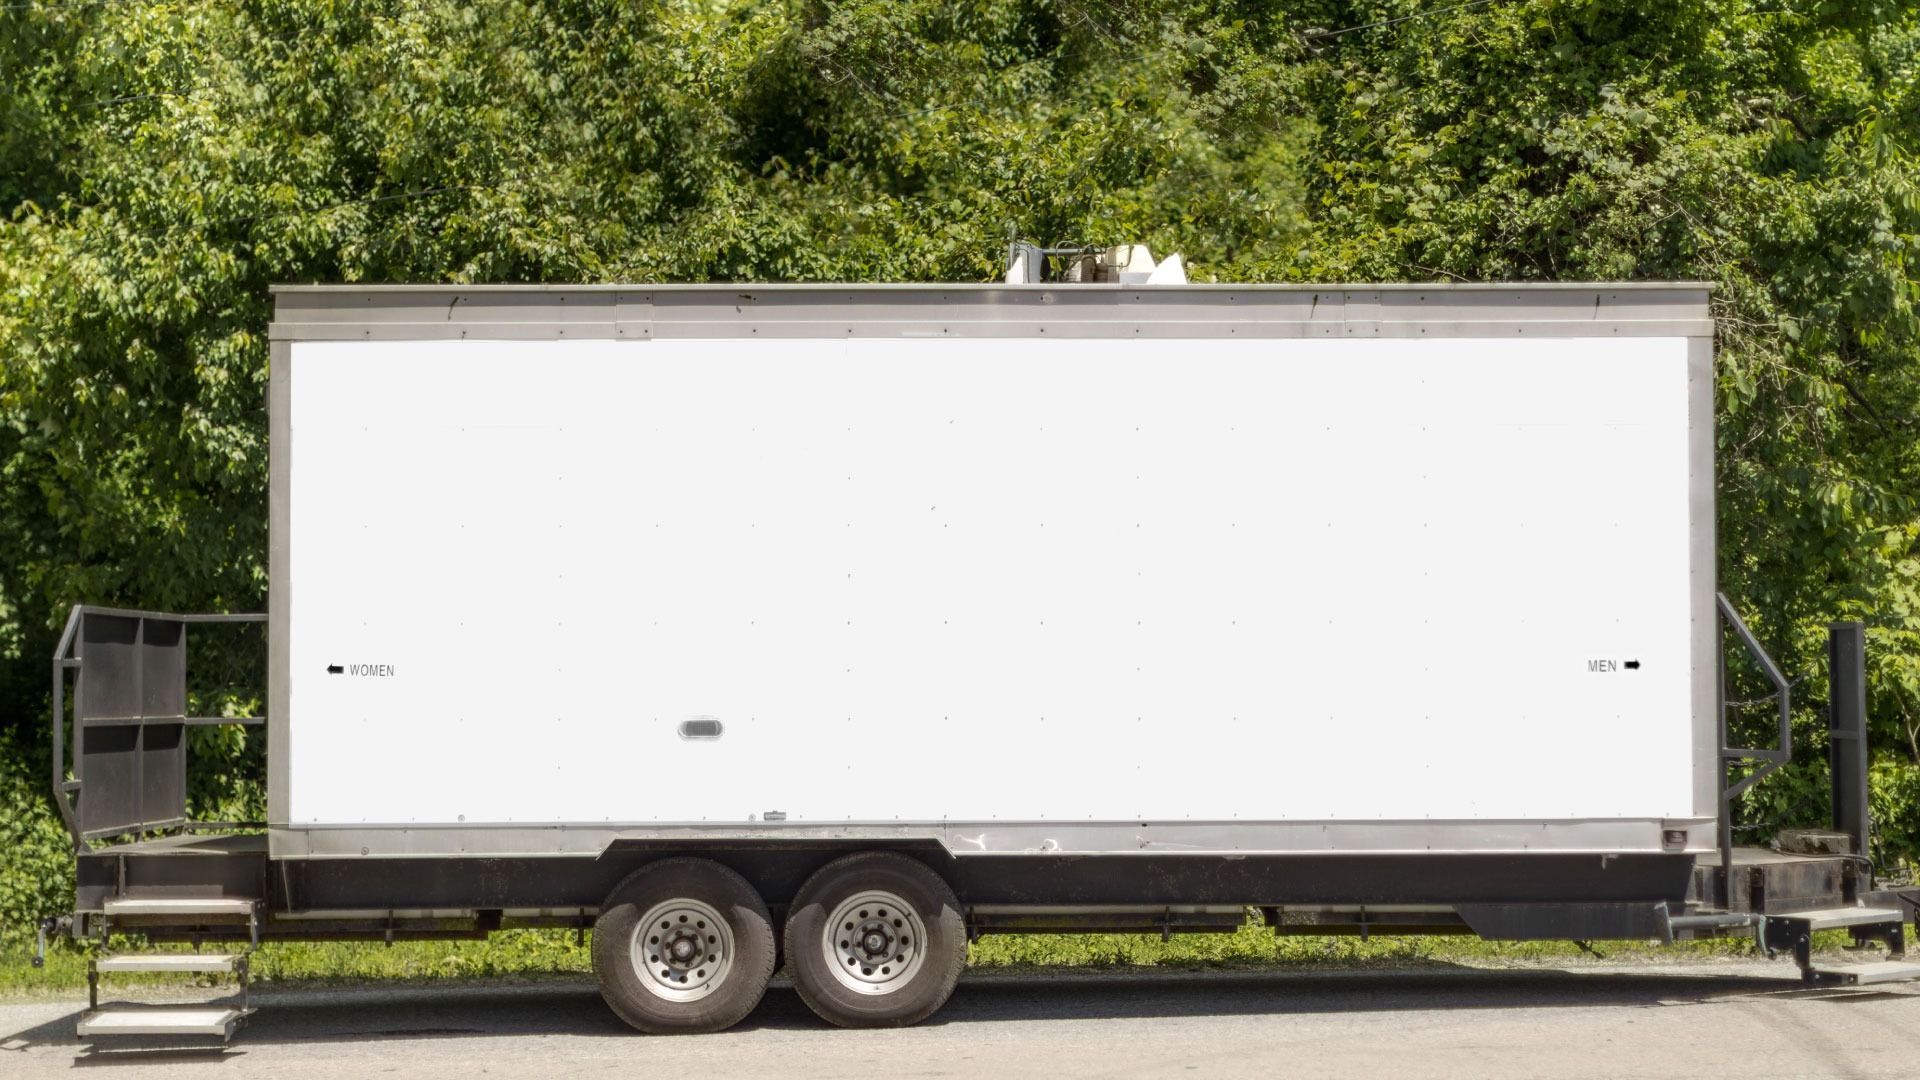 A white portable bathroom trailer is parked on the side of the road